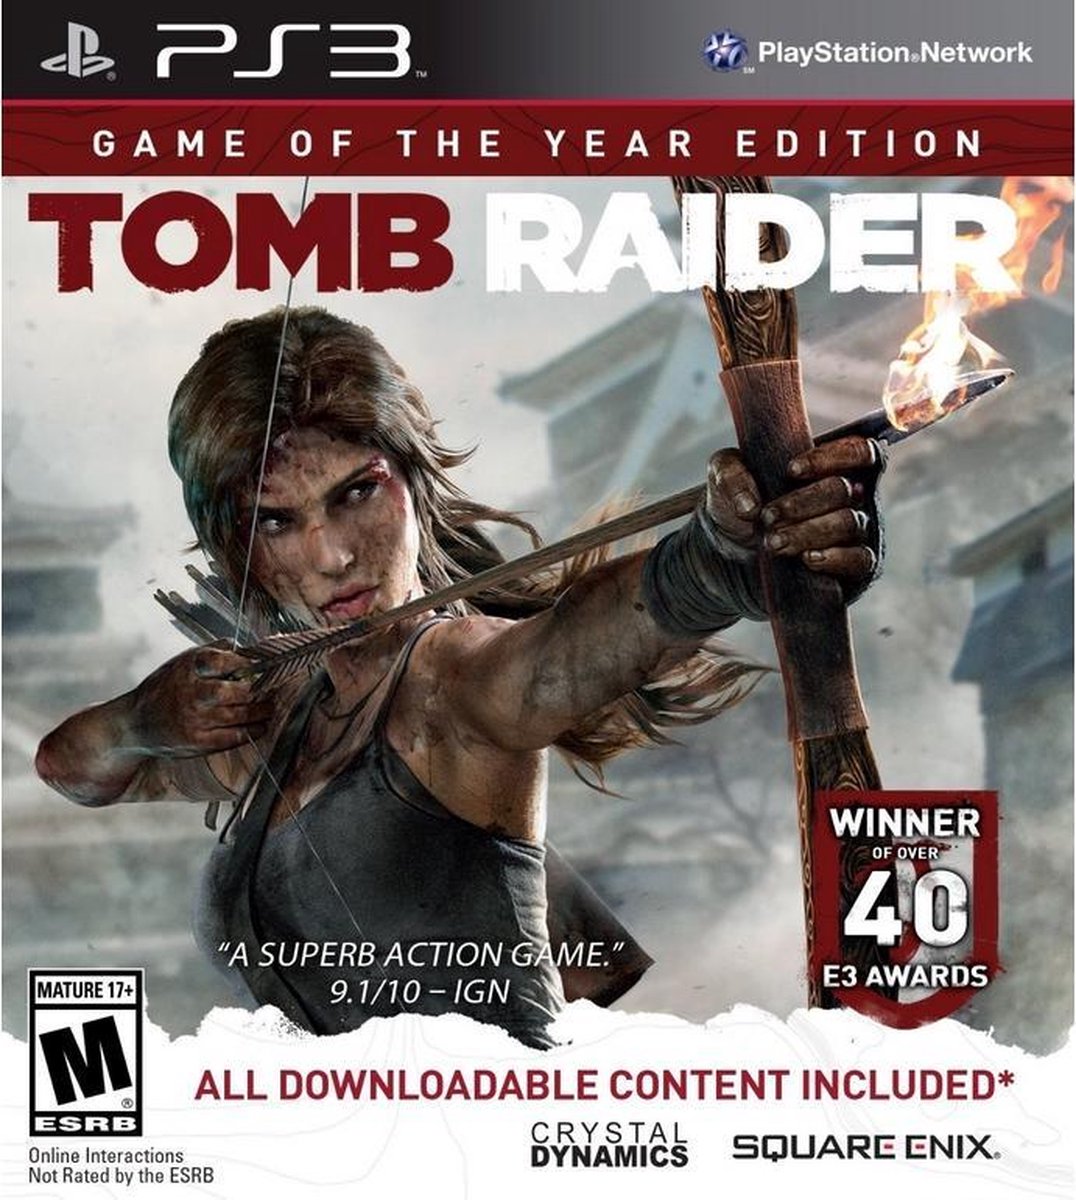 Square Enix Tomb Raider Game of the Year Edition